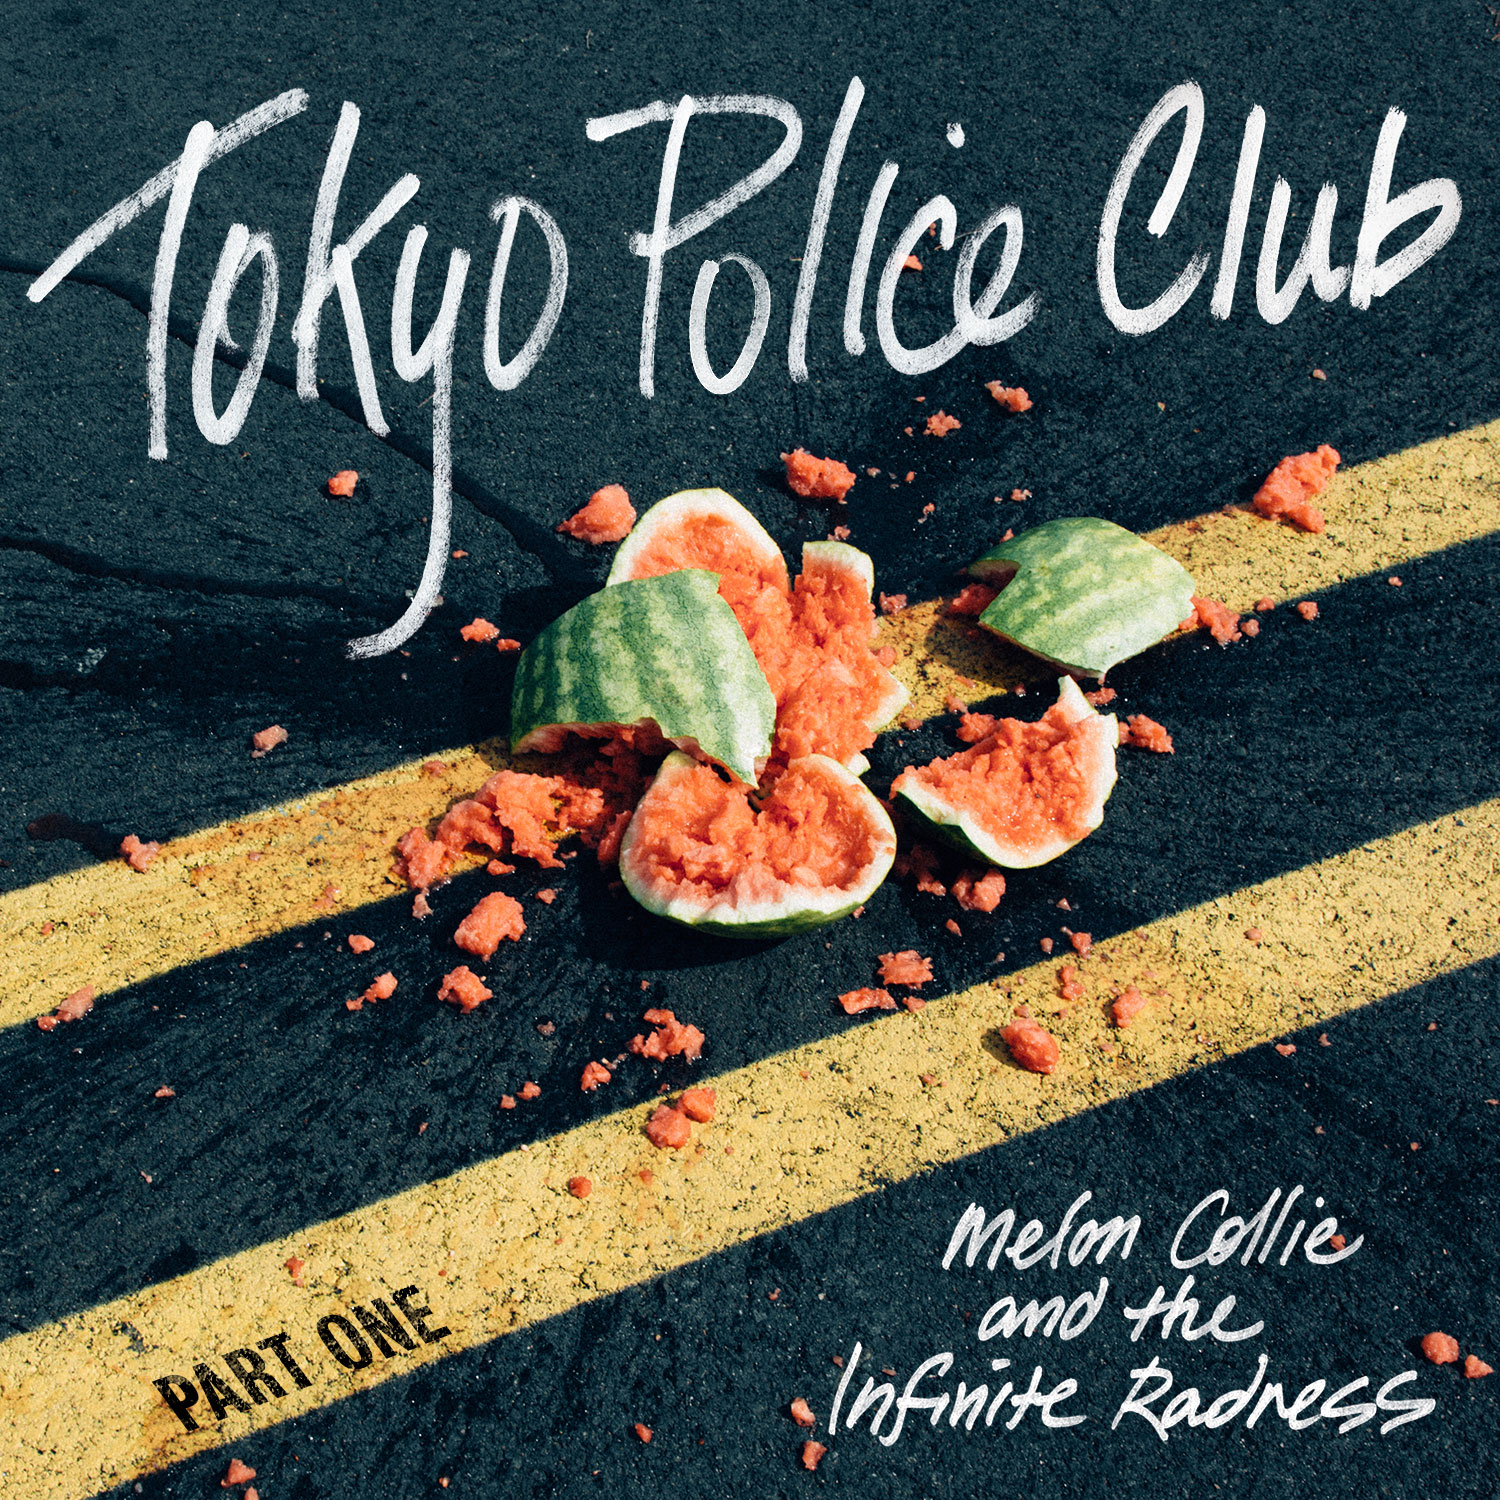 Tokyo Police Club's Melon Collie and the Infinite Radness: Part One EP